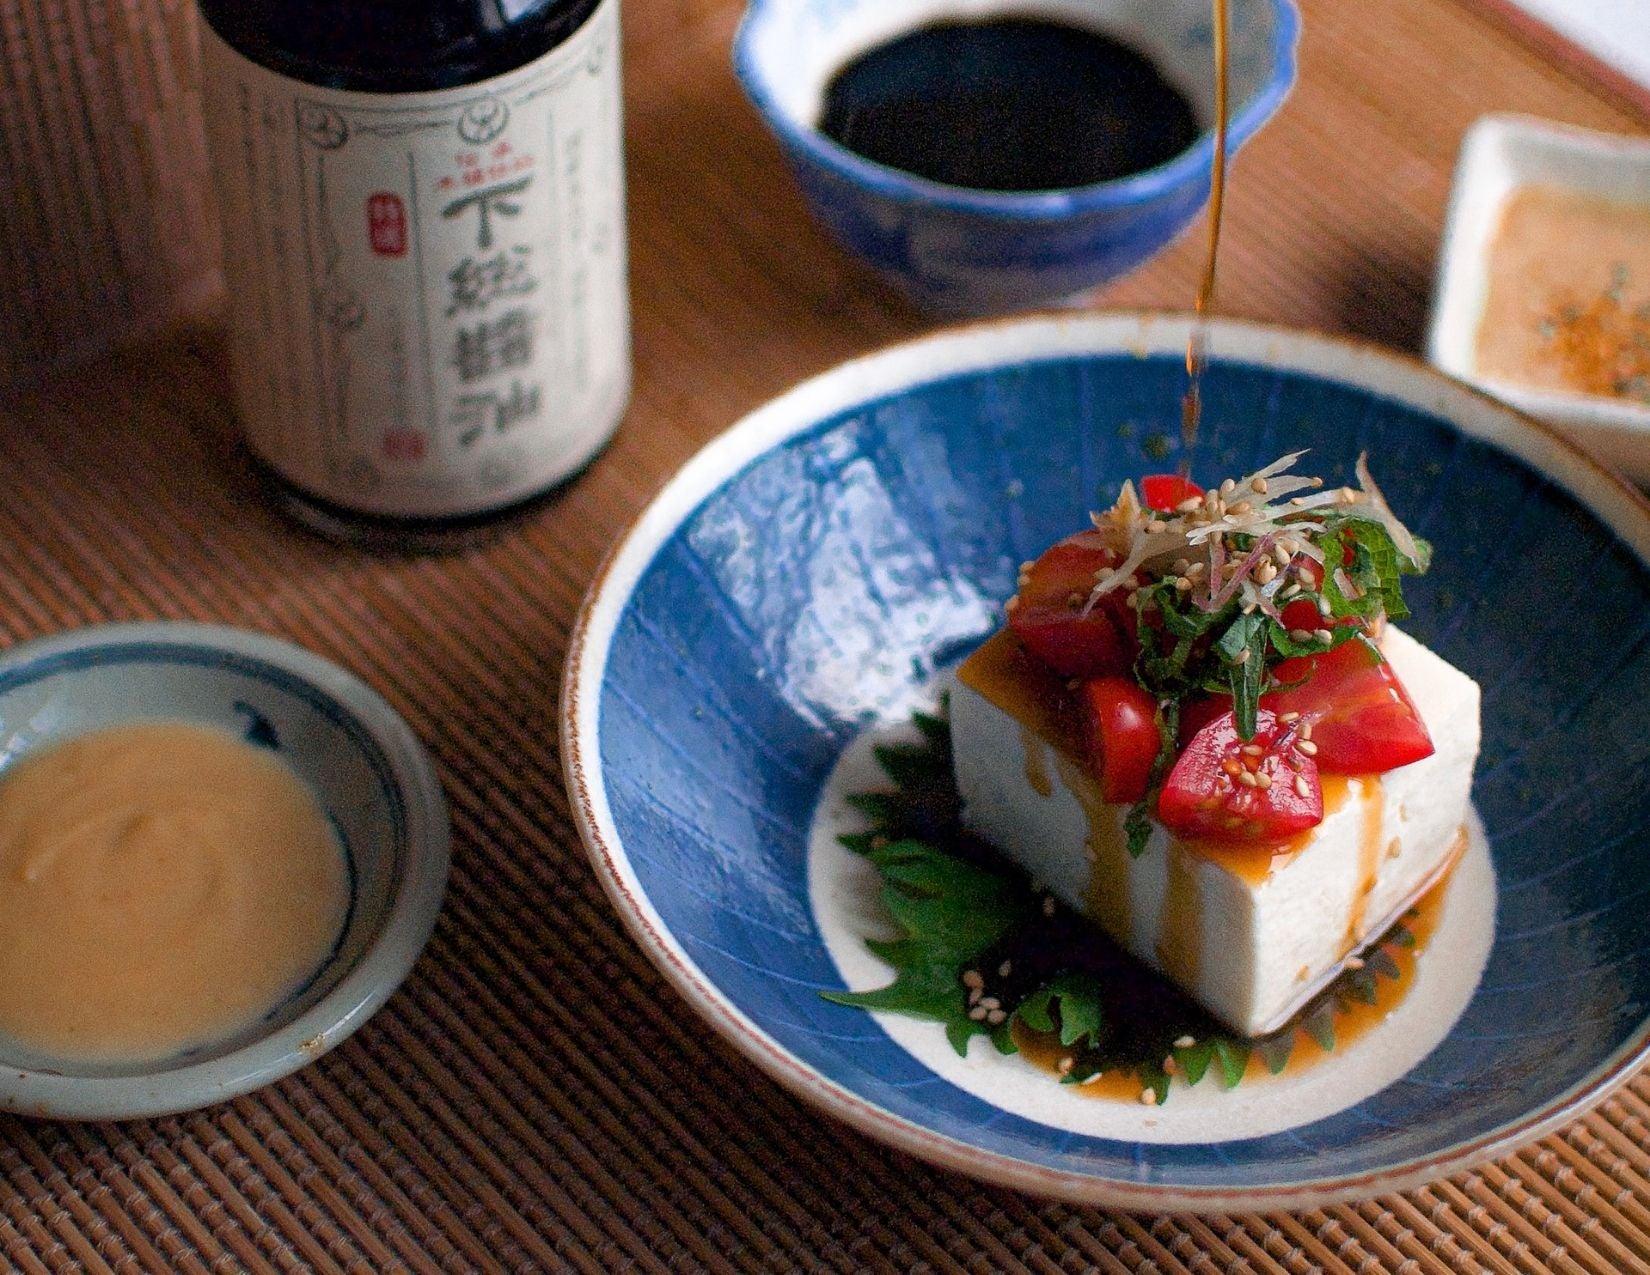 Japanese sauces add a dash of flavor and umami to your dishes. Choose from our selection of artisanal, all-natural Japanese sauces made by local farmers and producers. Orders over US$99 ship free. Worldwide delivery.